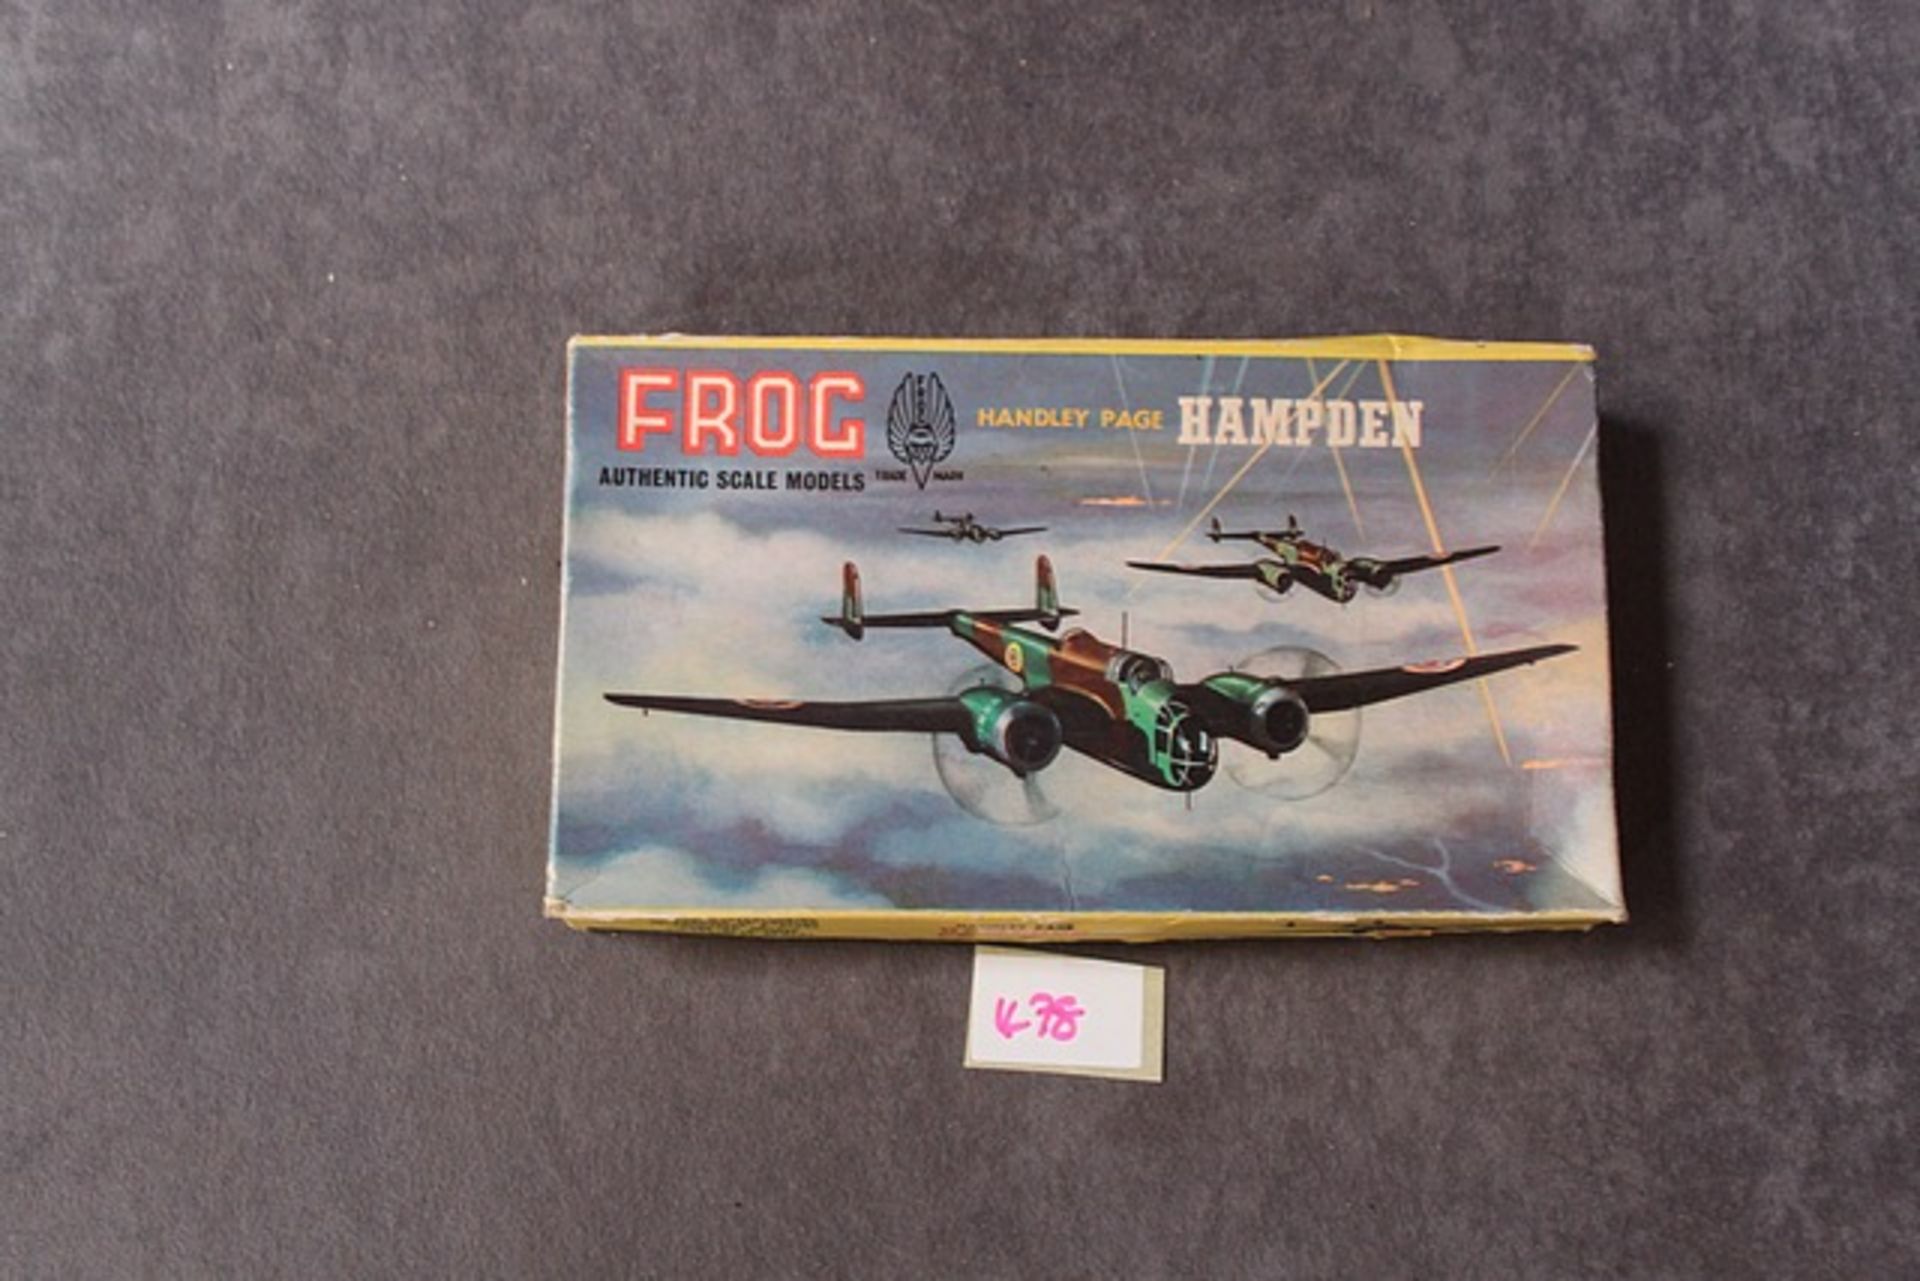 Frog Authentic Scale Models Handley Page Hampden with instuctions in box